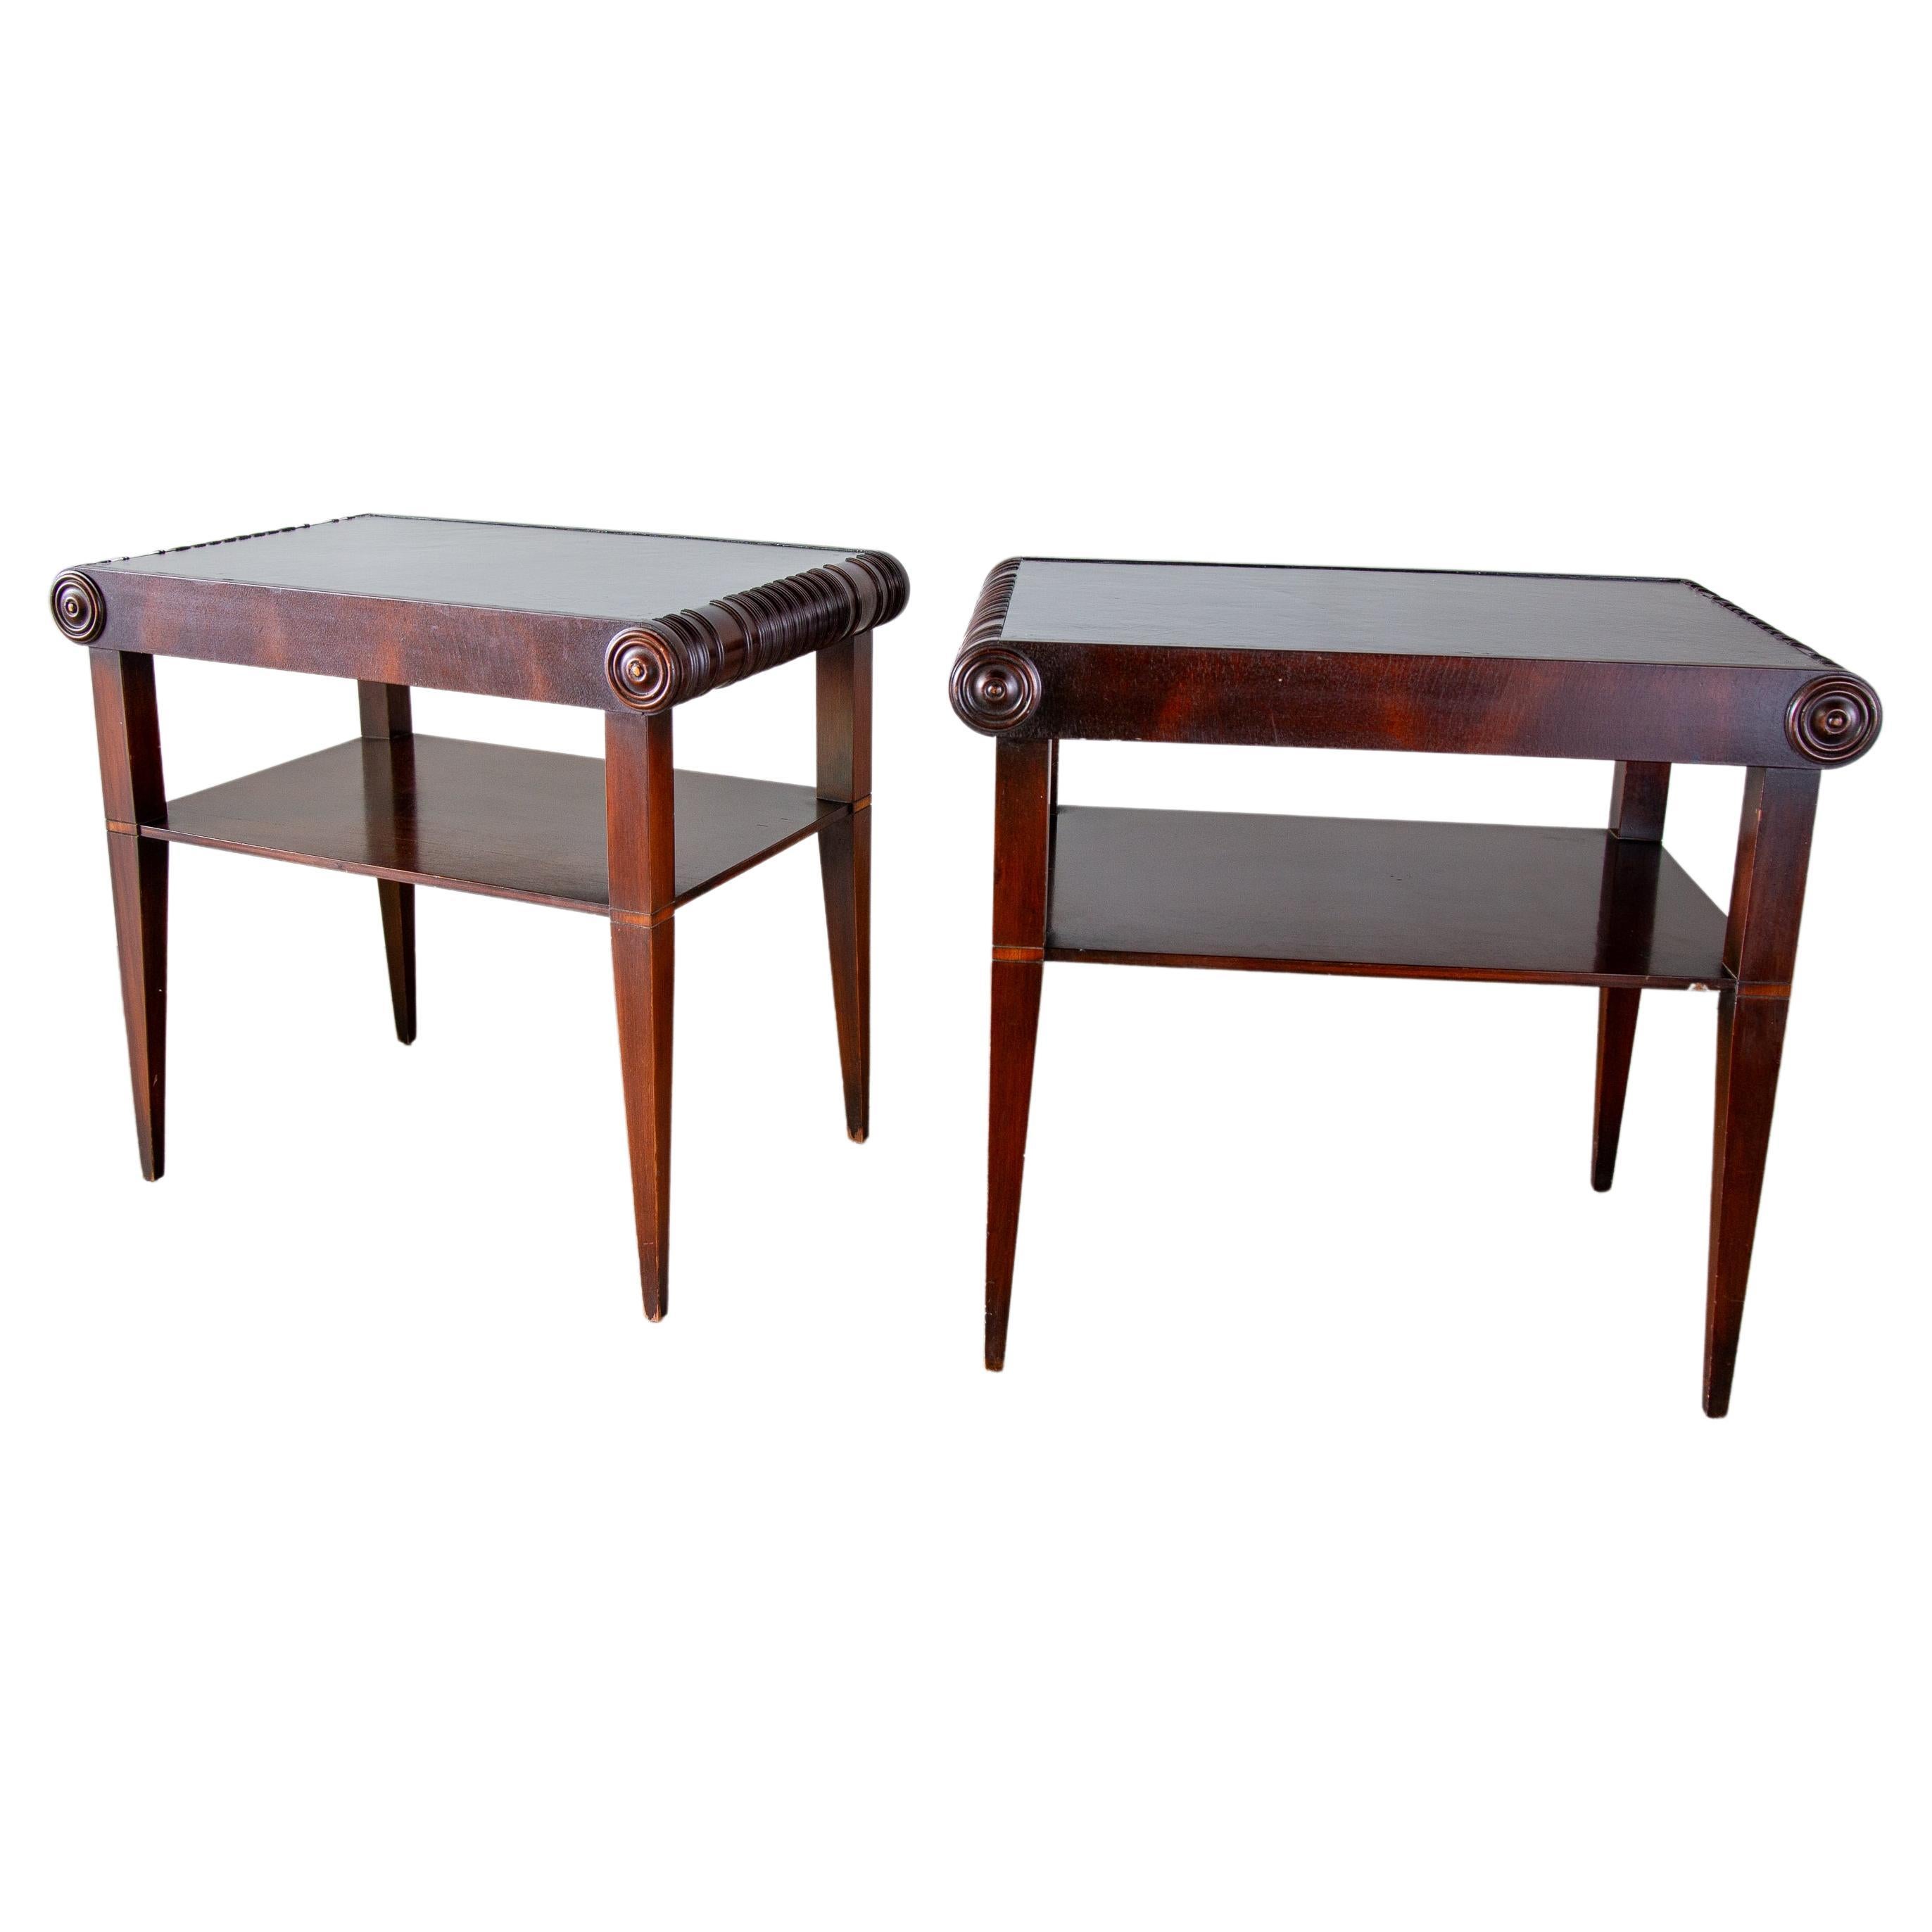 1920s Swedish Art Deco Leather top Mahogany End Tables Nightstands For Sale